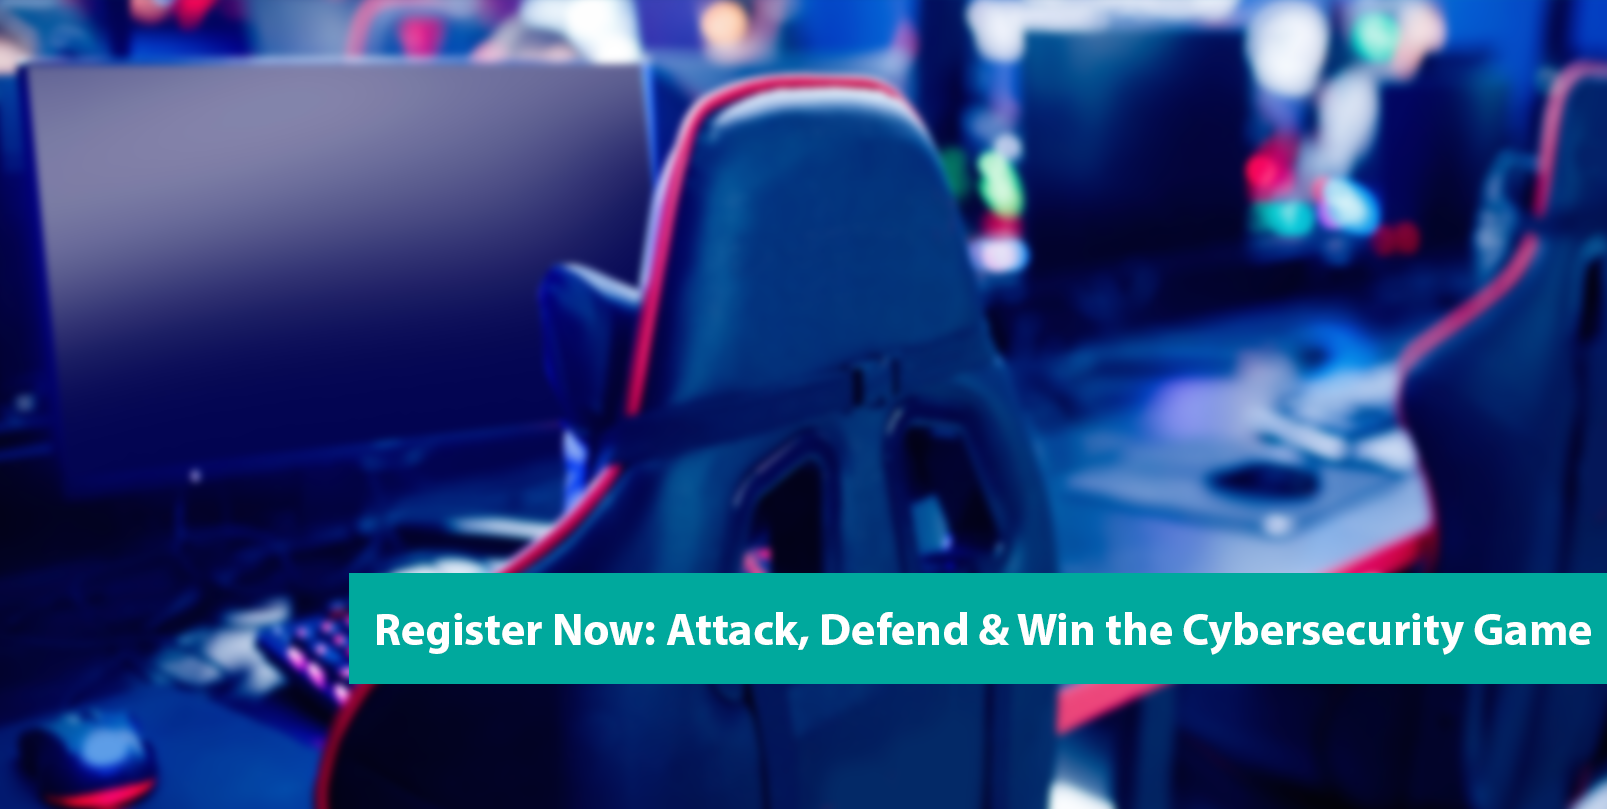 Register Now: Attack, Defend & Win the Cybersecurity Game